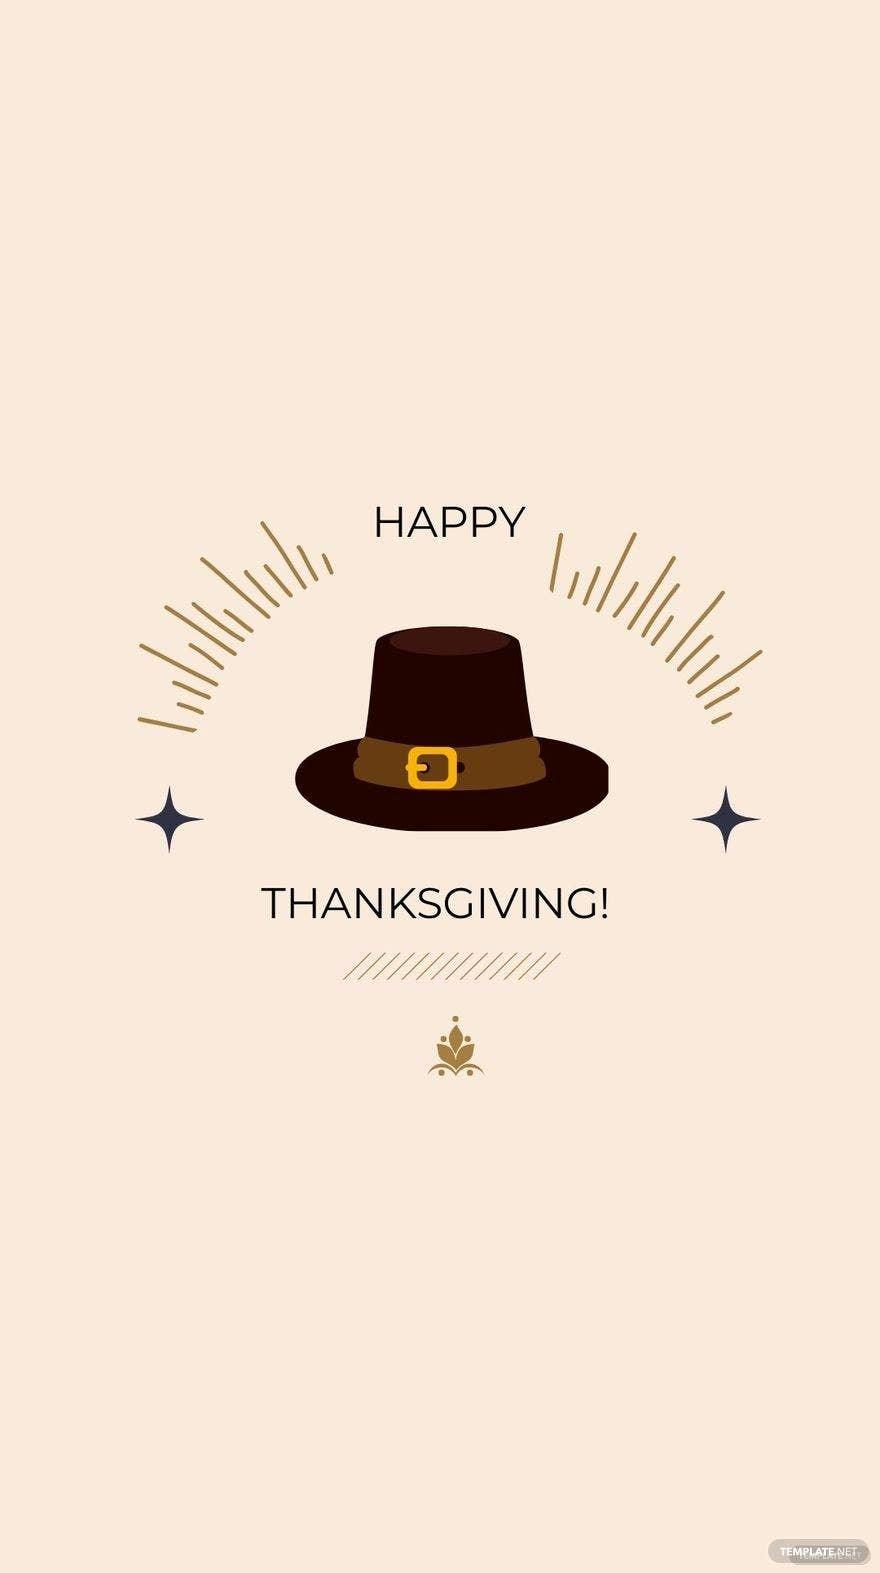 Thanksgiving Day Background Image In Pdf